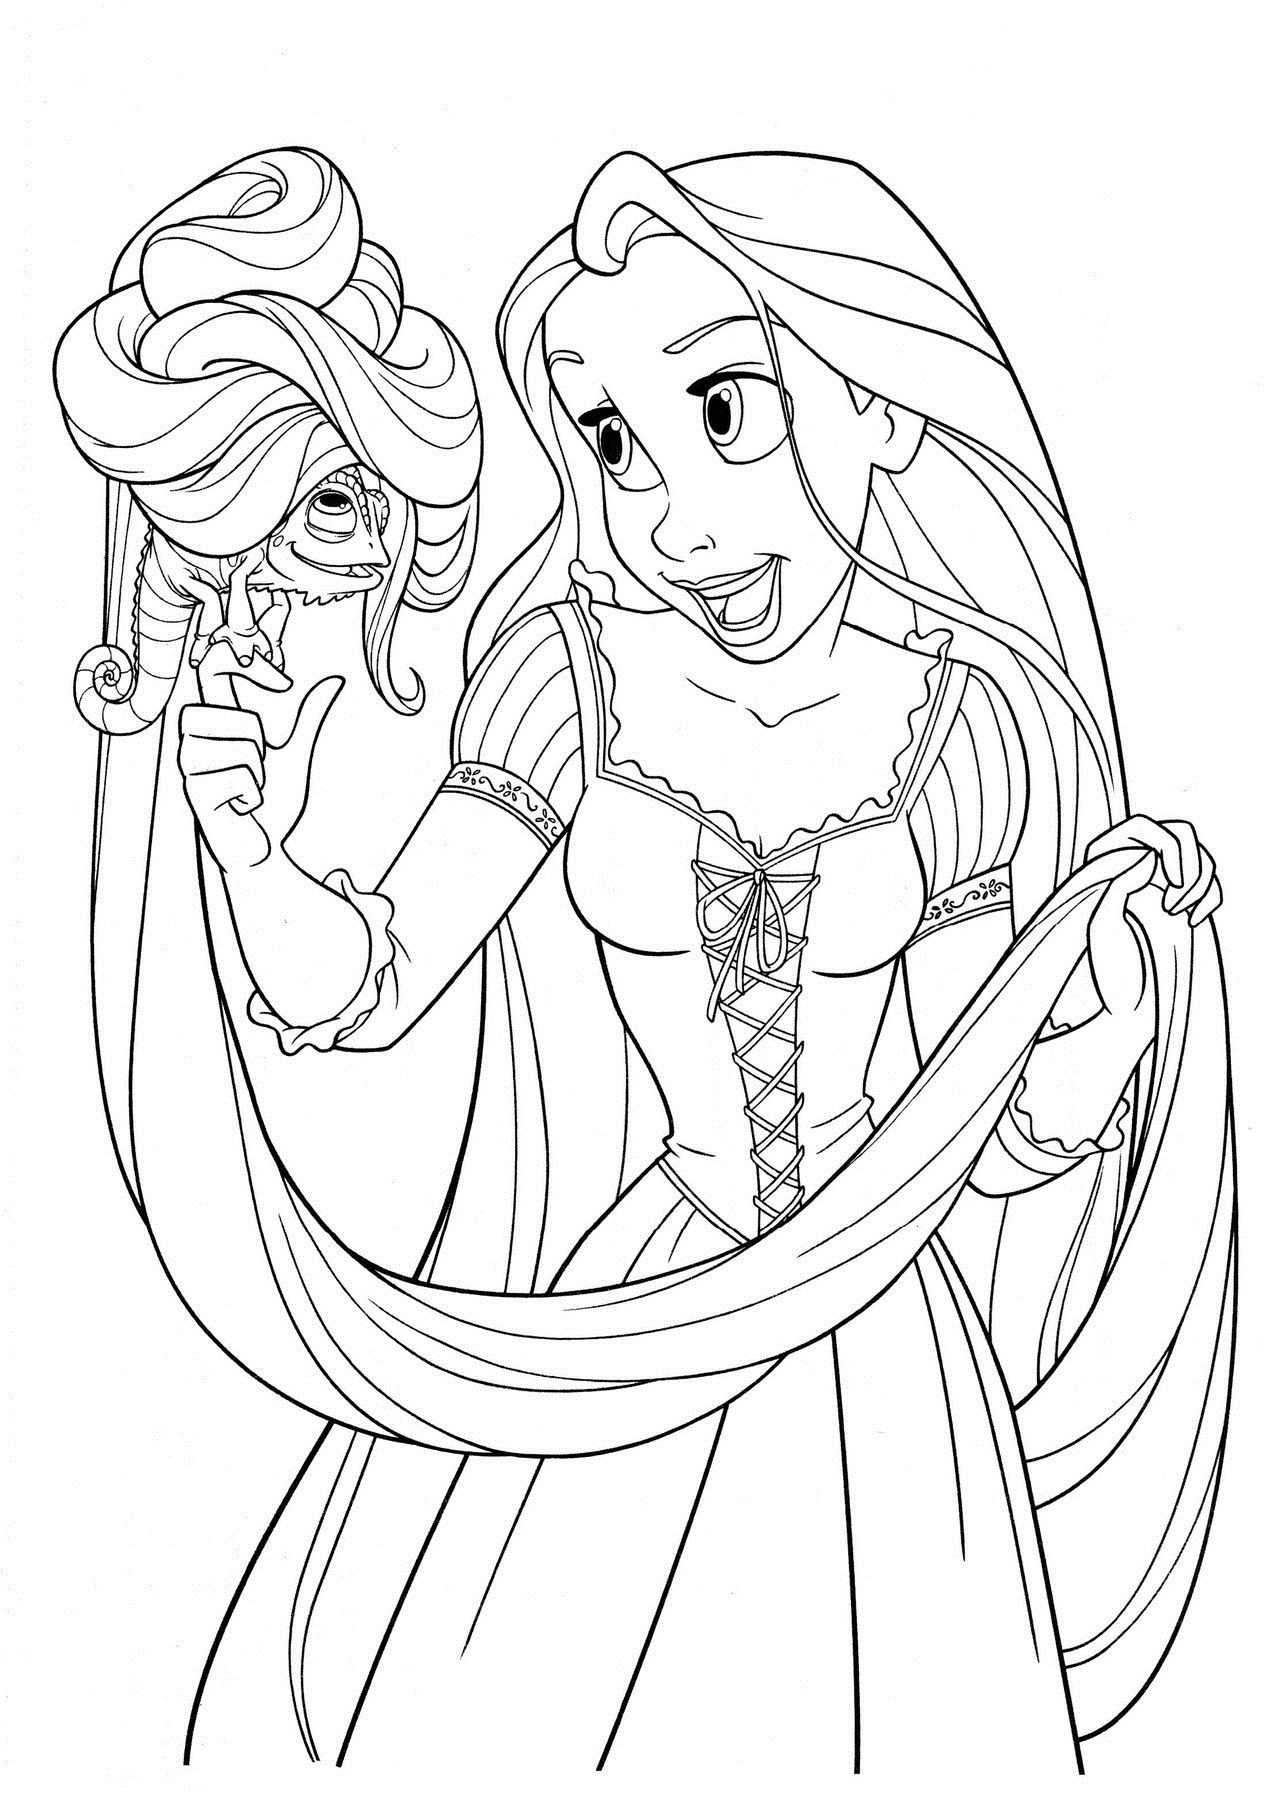 Free Printable Tangled Coloring Pages For Kids | Party Time - Free Printable Tangled